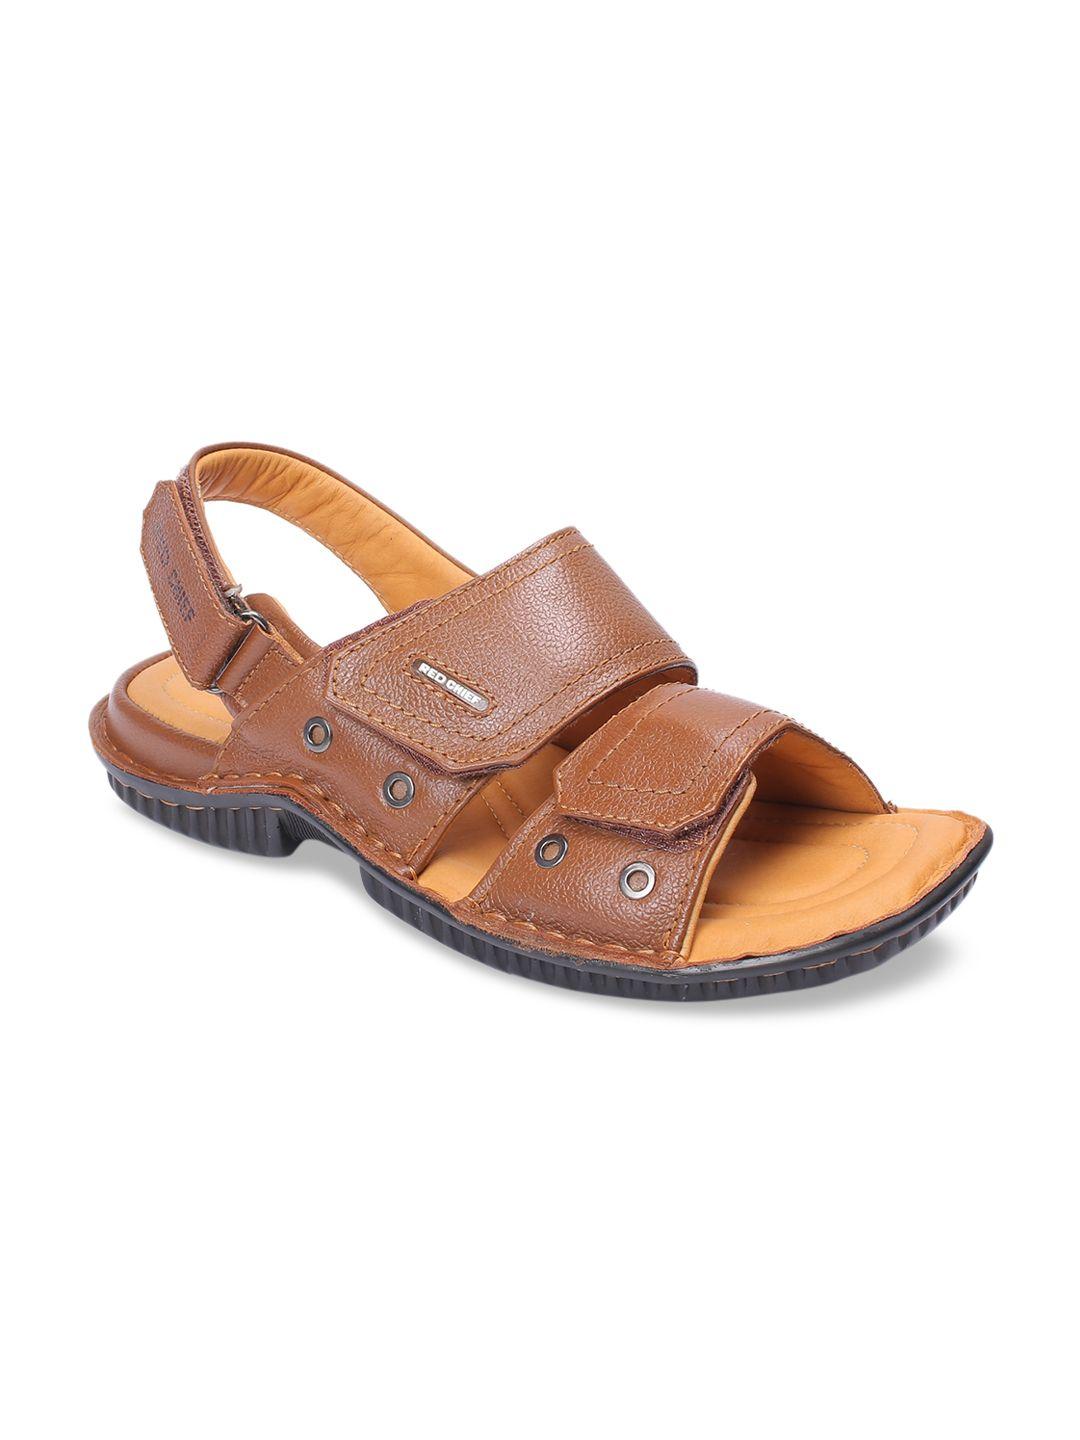 red chief men tan brown leather sandals